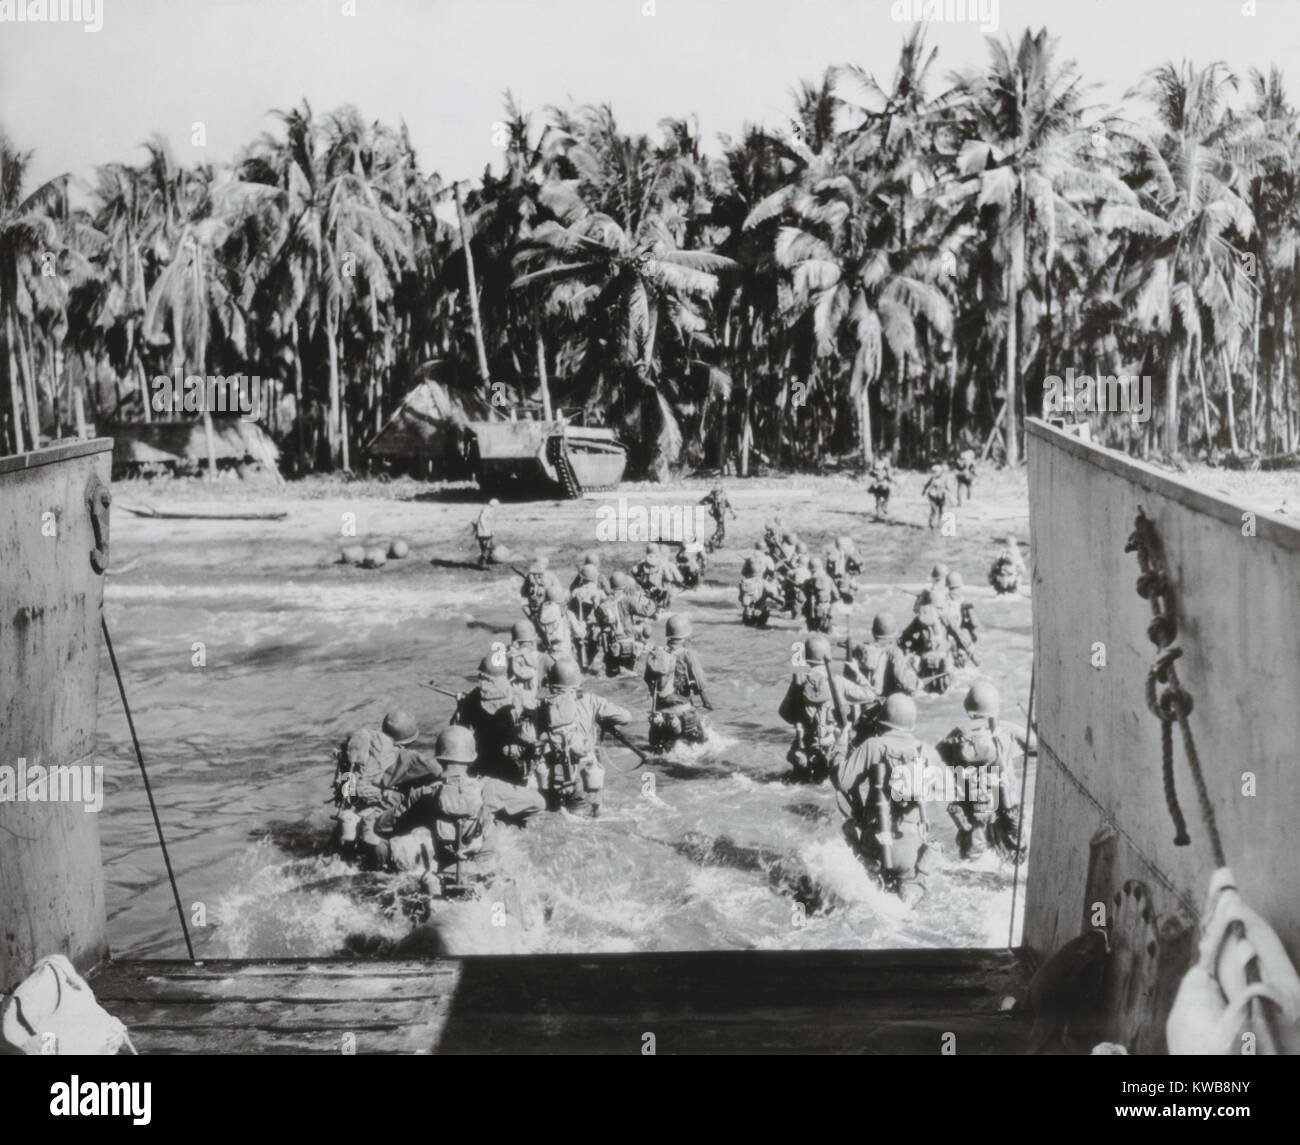 U.S. troops wade ashore, across heavily mined beaches, during invasion of Cebu Island. March 26, 1945. Philippines, World War 2. (BSLOC 2014 10 112) Stock Photo